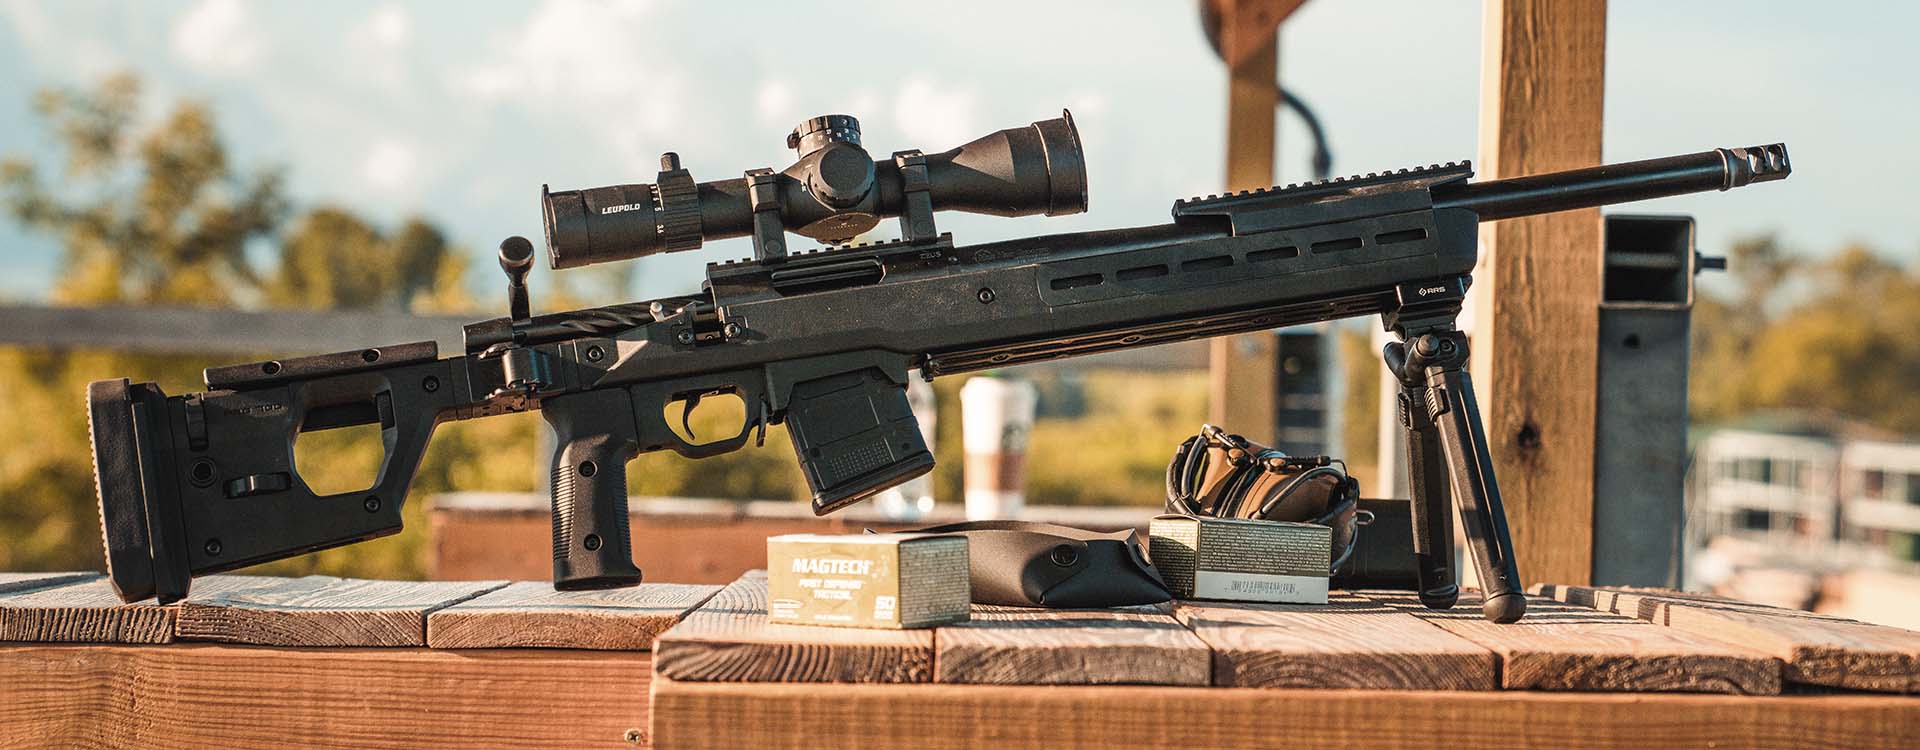 Magpul PMAG 10 5.56 AC in Magpul Pro 700 Stock outdoors on a bench at the range